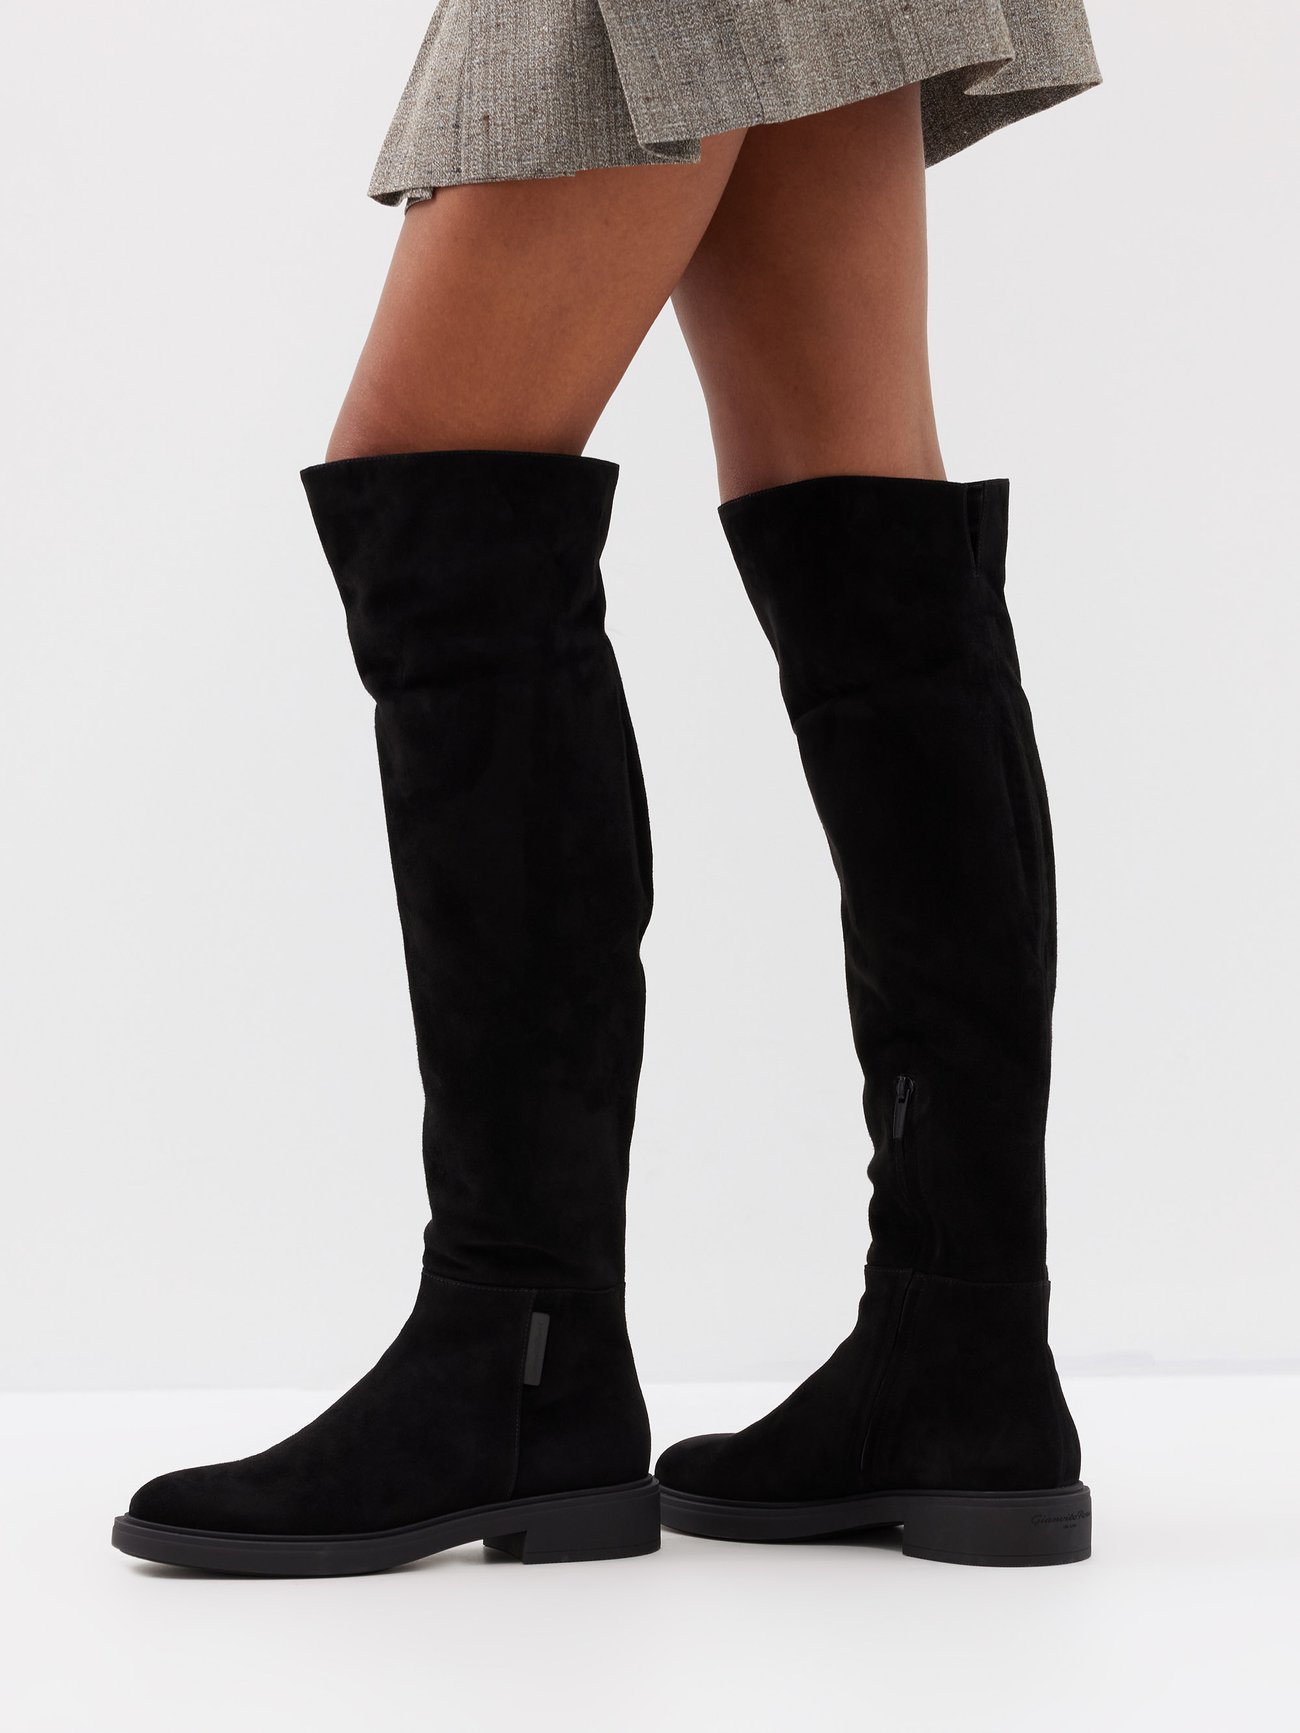 Lexington suede over-the-knee boots